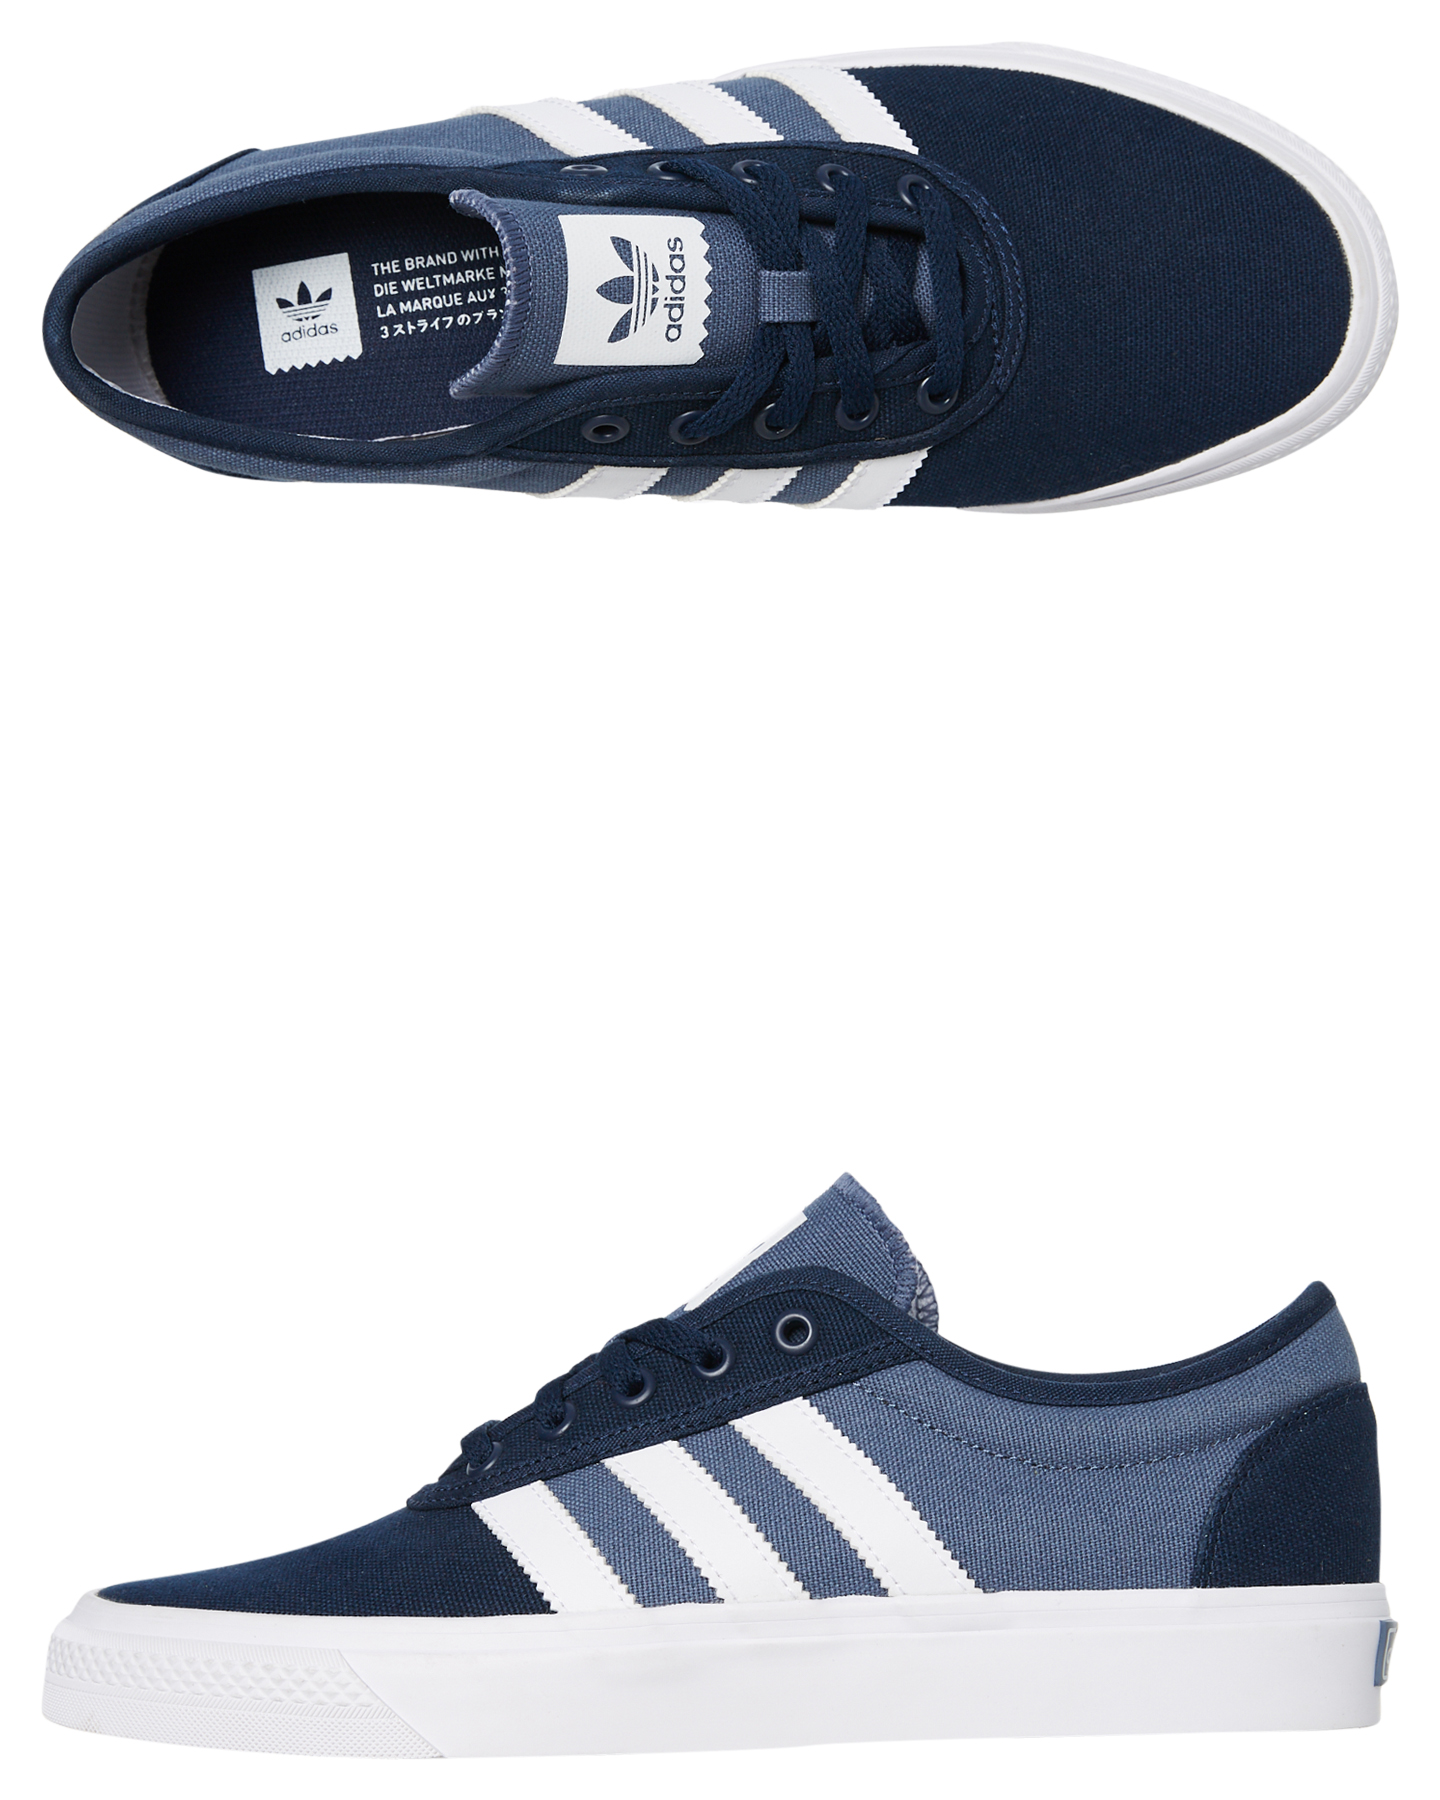 adidas womens navy shoes